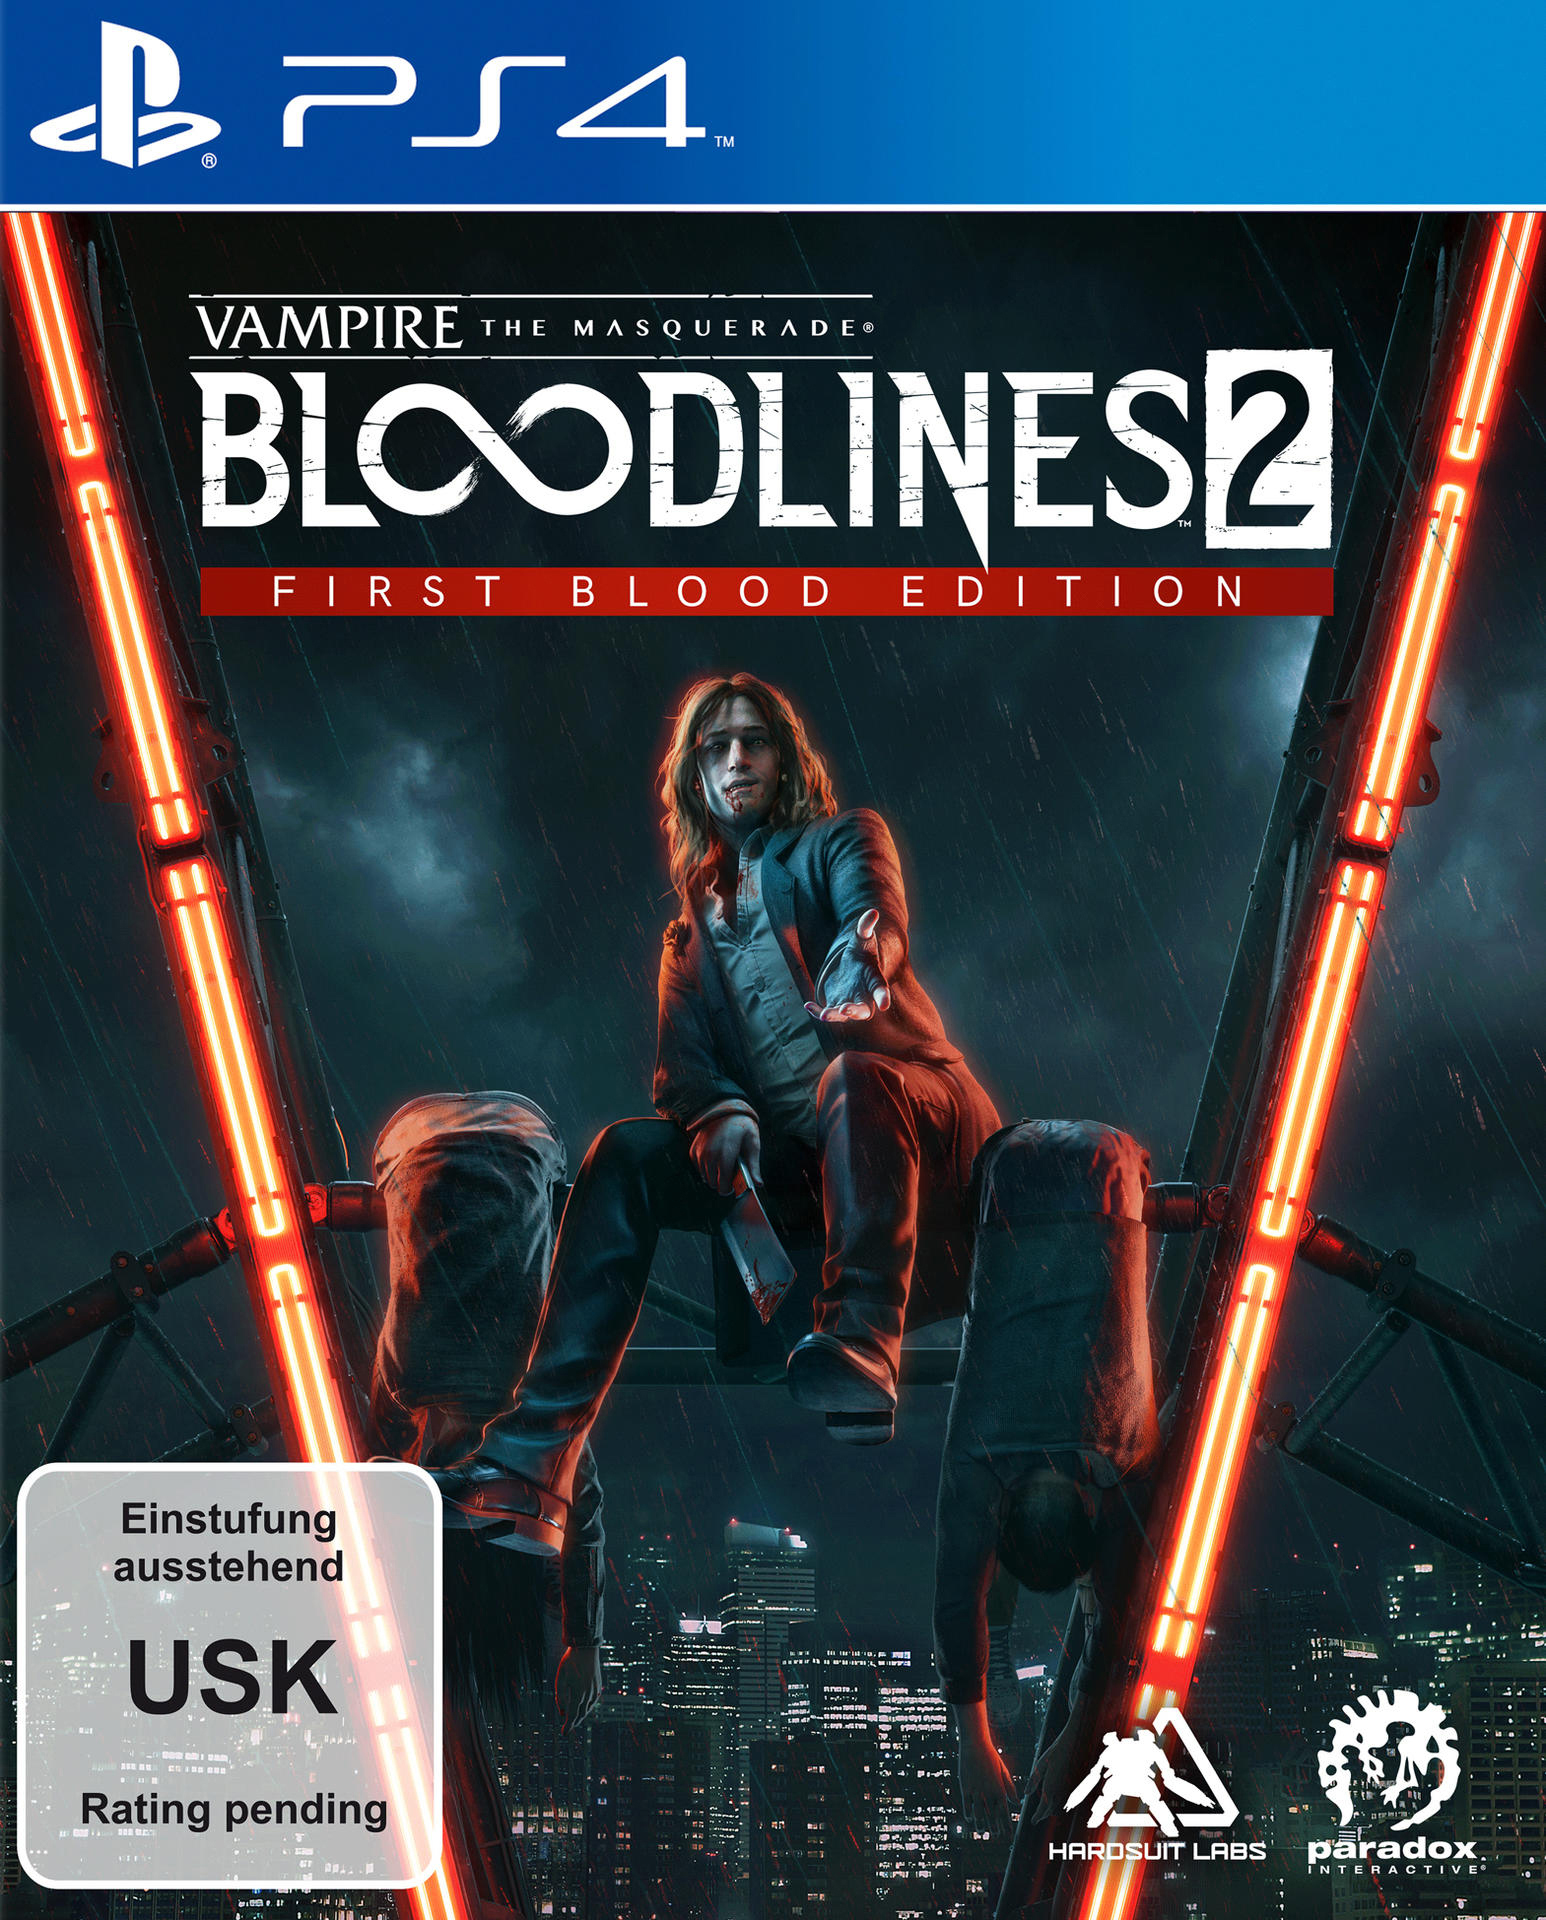 Bloodlines 4] Edition Vampire: - [PlayStation Blood 2 The First - Masquerade